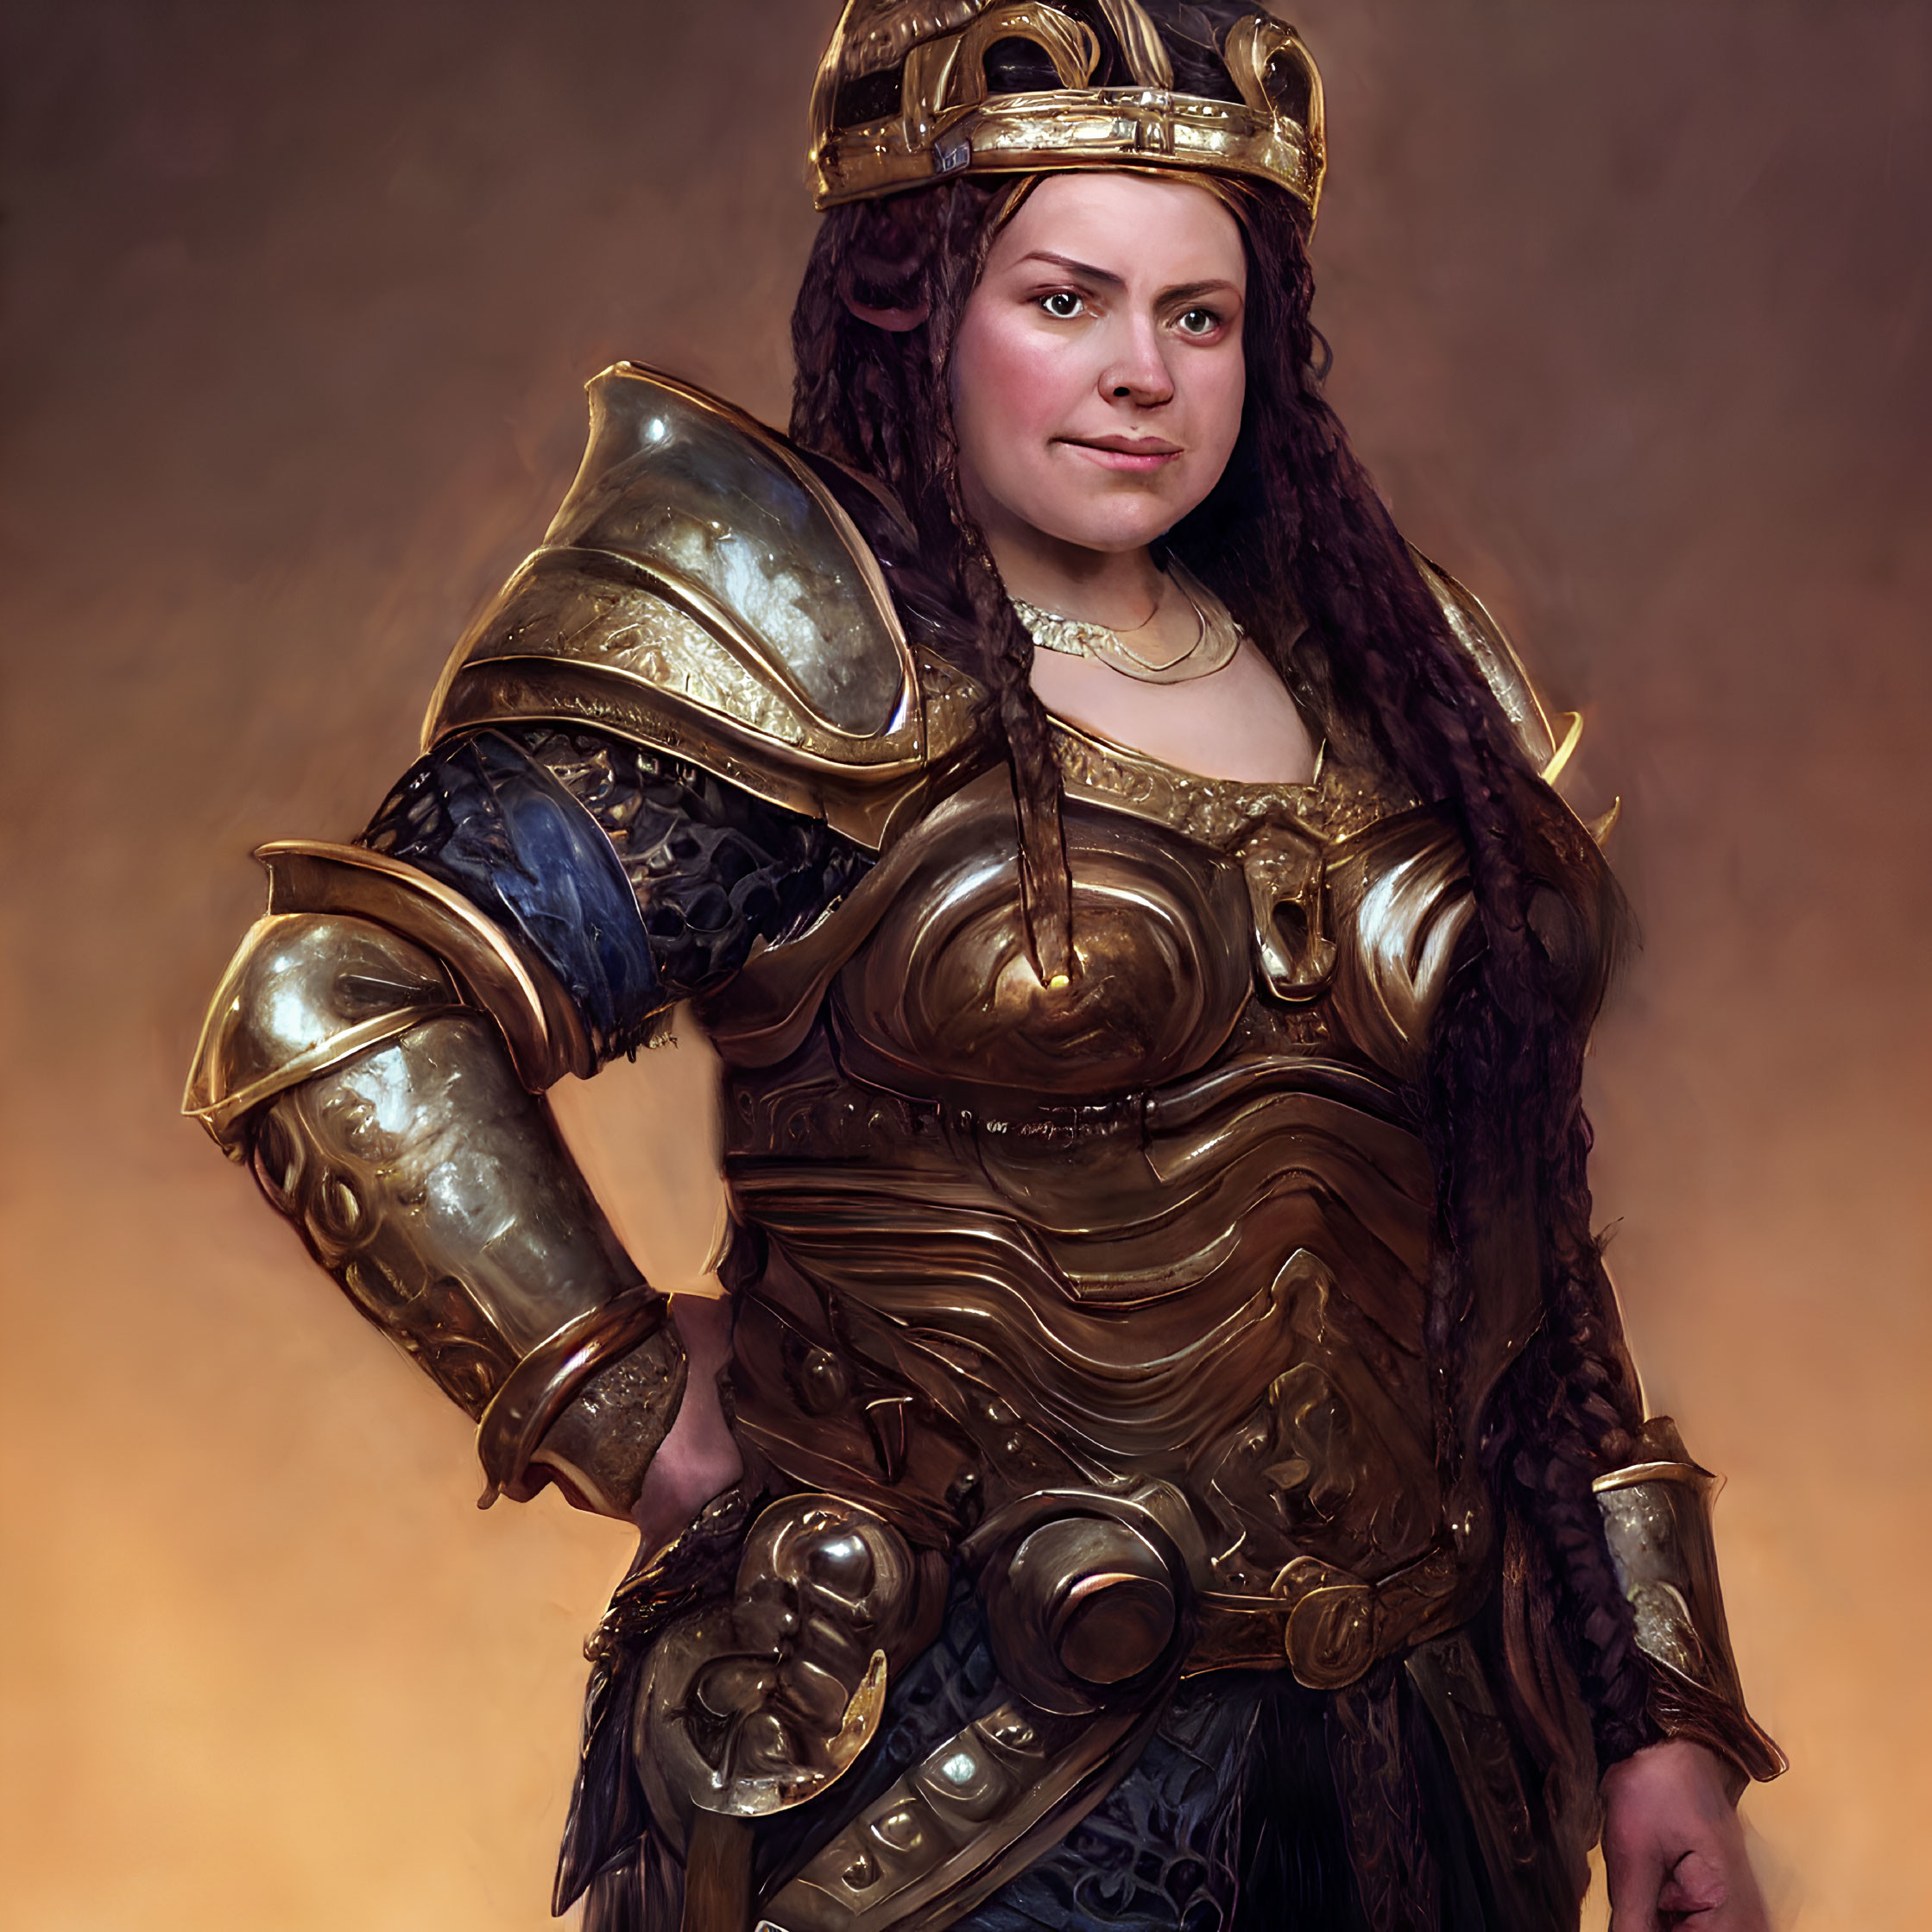 Regal woman in golden armor with crown and braided hair.